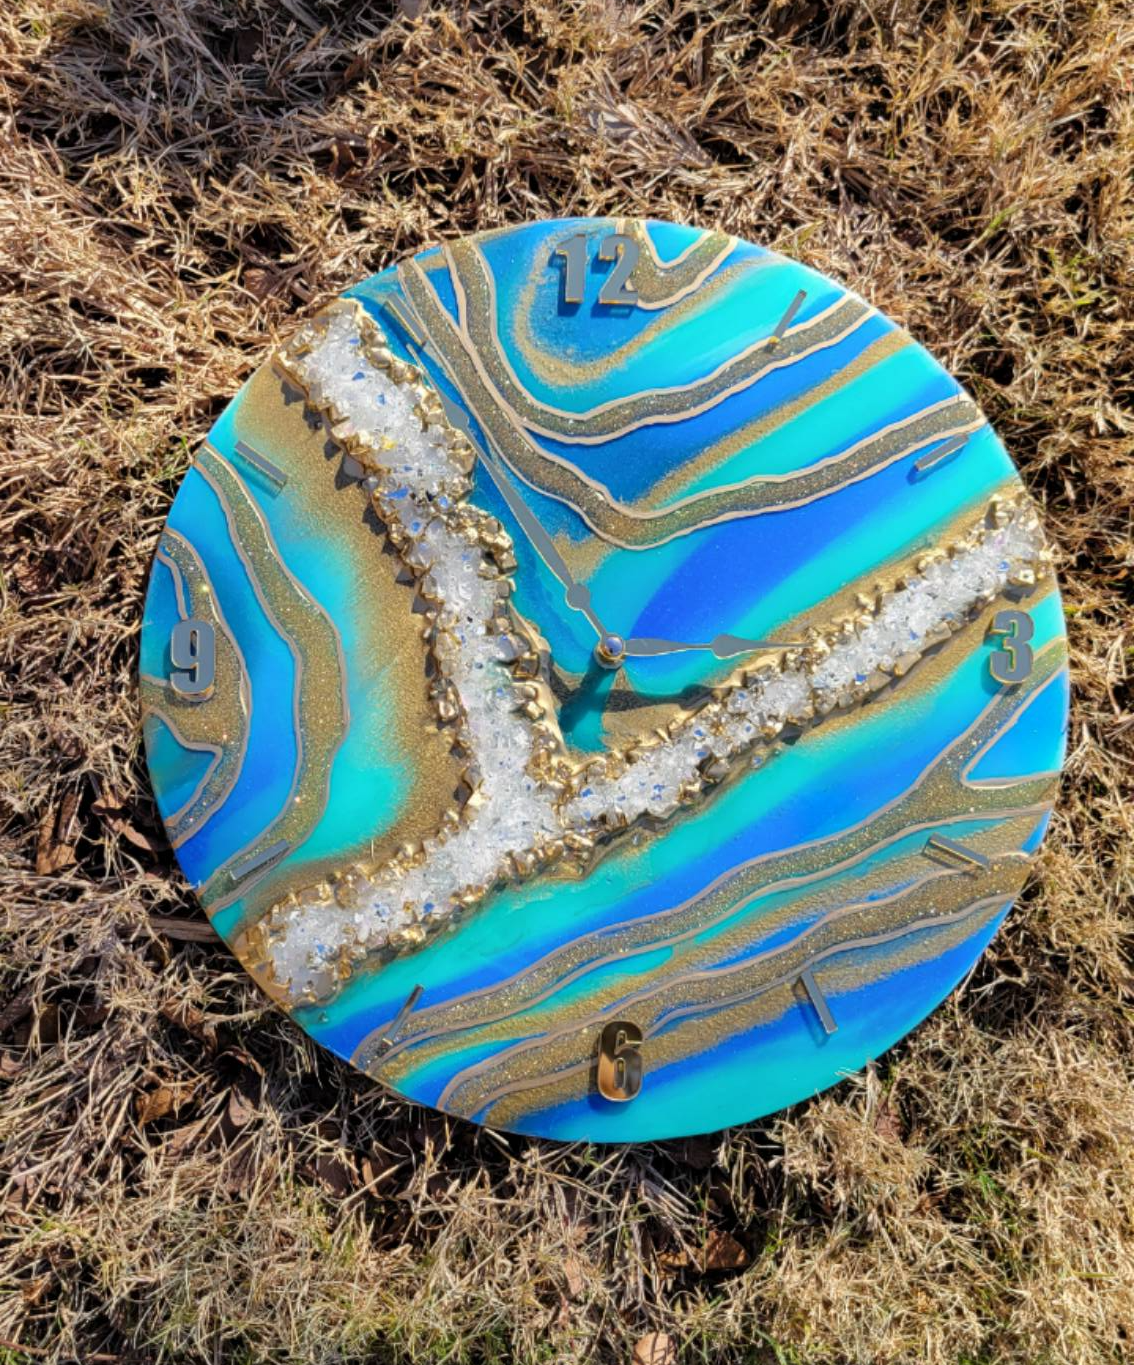 Teal and Royal Blue Geode Clock